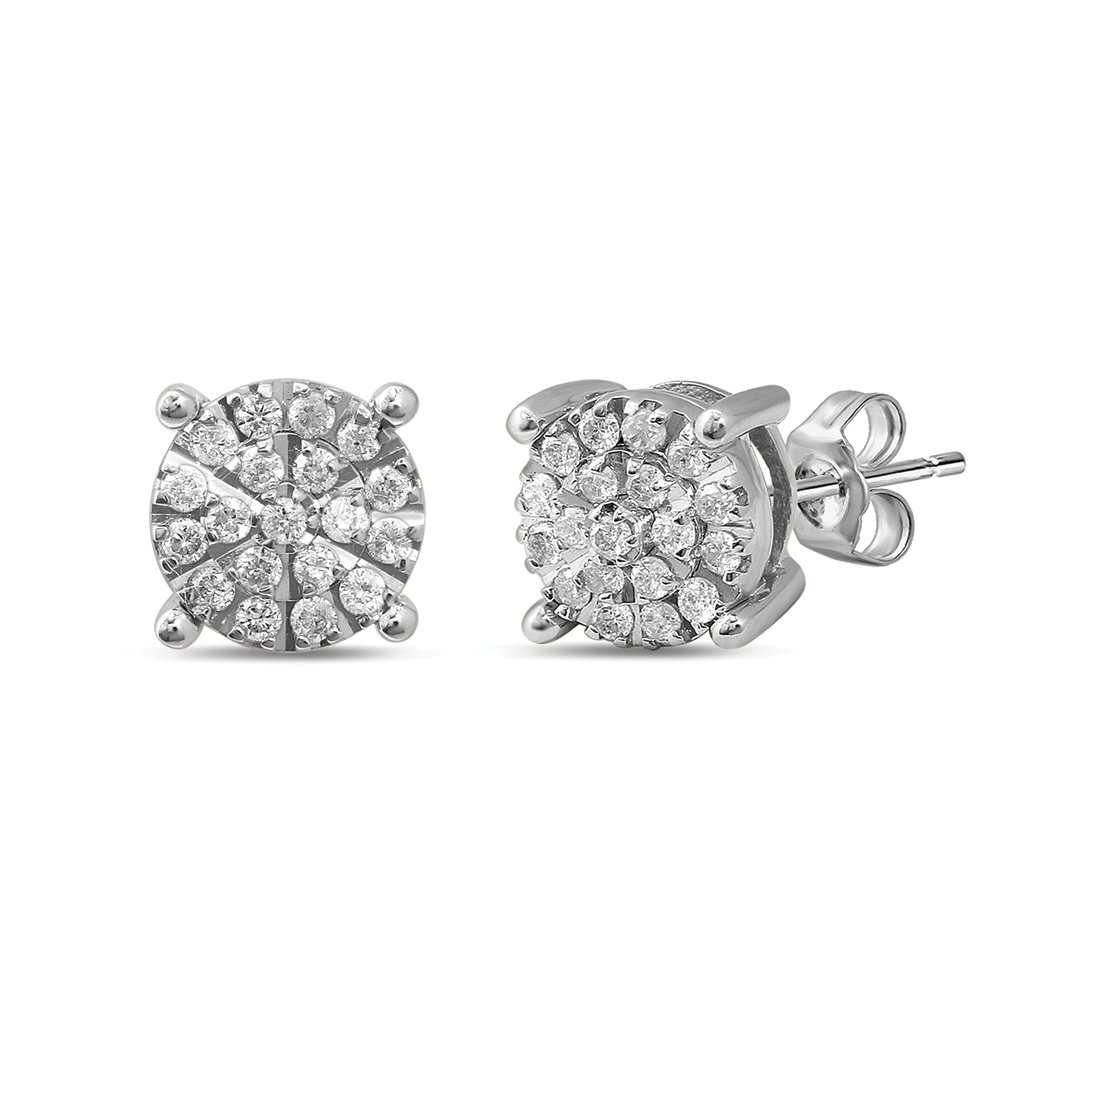 Martina Brilliant Illusion Earrings with 1/4ct of Diamonds in 9ct White Gold Earrings Bevilles 